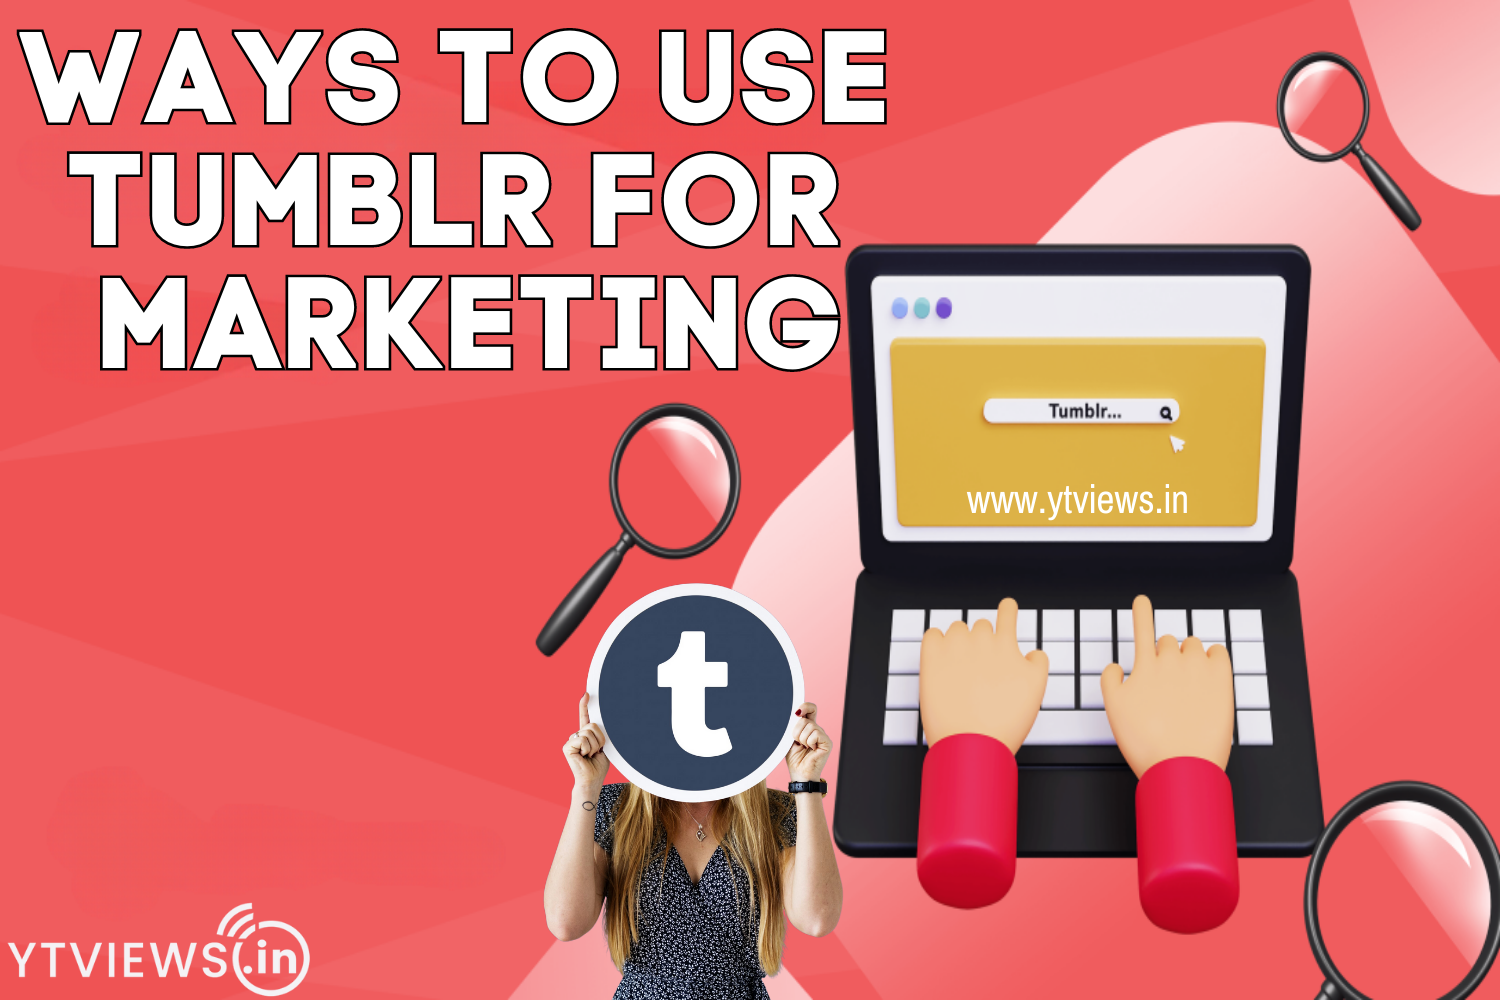 Ways to use Tumblr for marketing